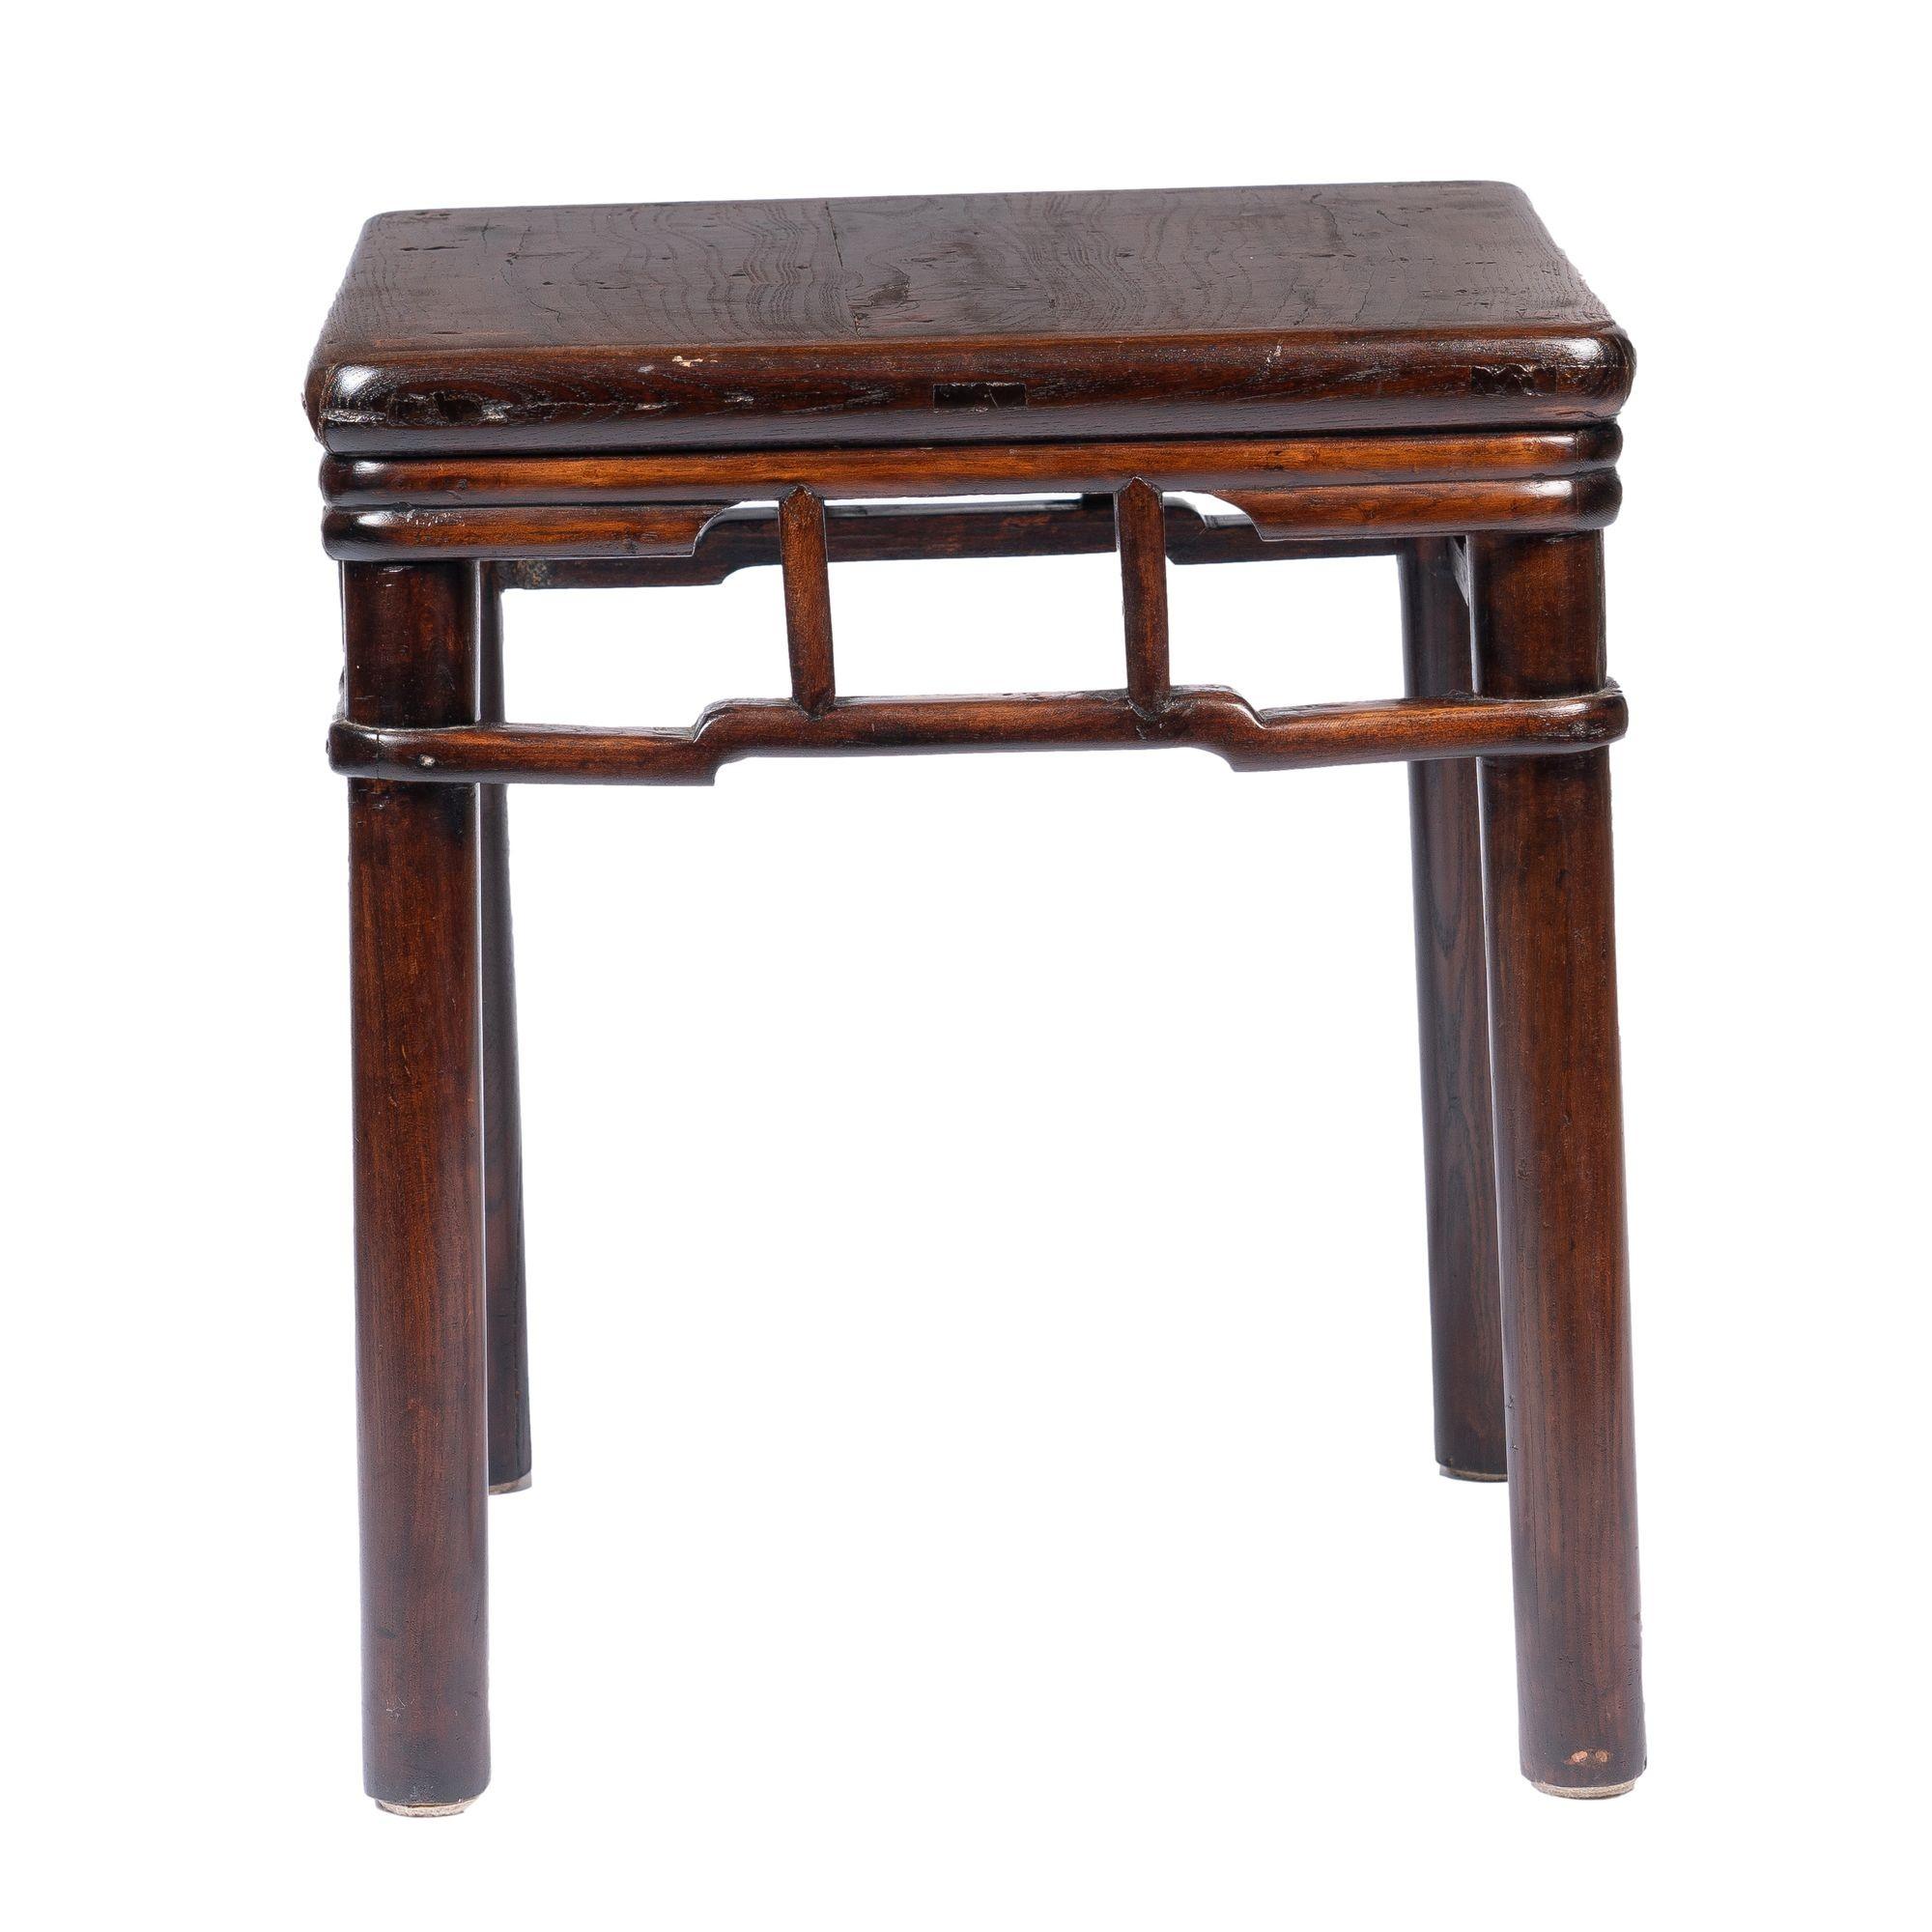 Pair of Chinese Elm Stools with Hump Back Rail, 1780-1820 For Sale 5